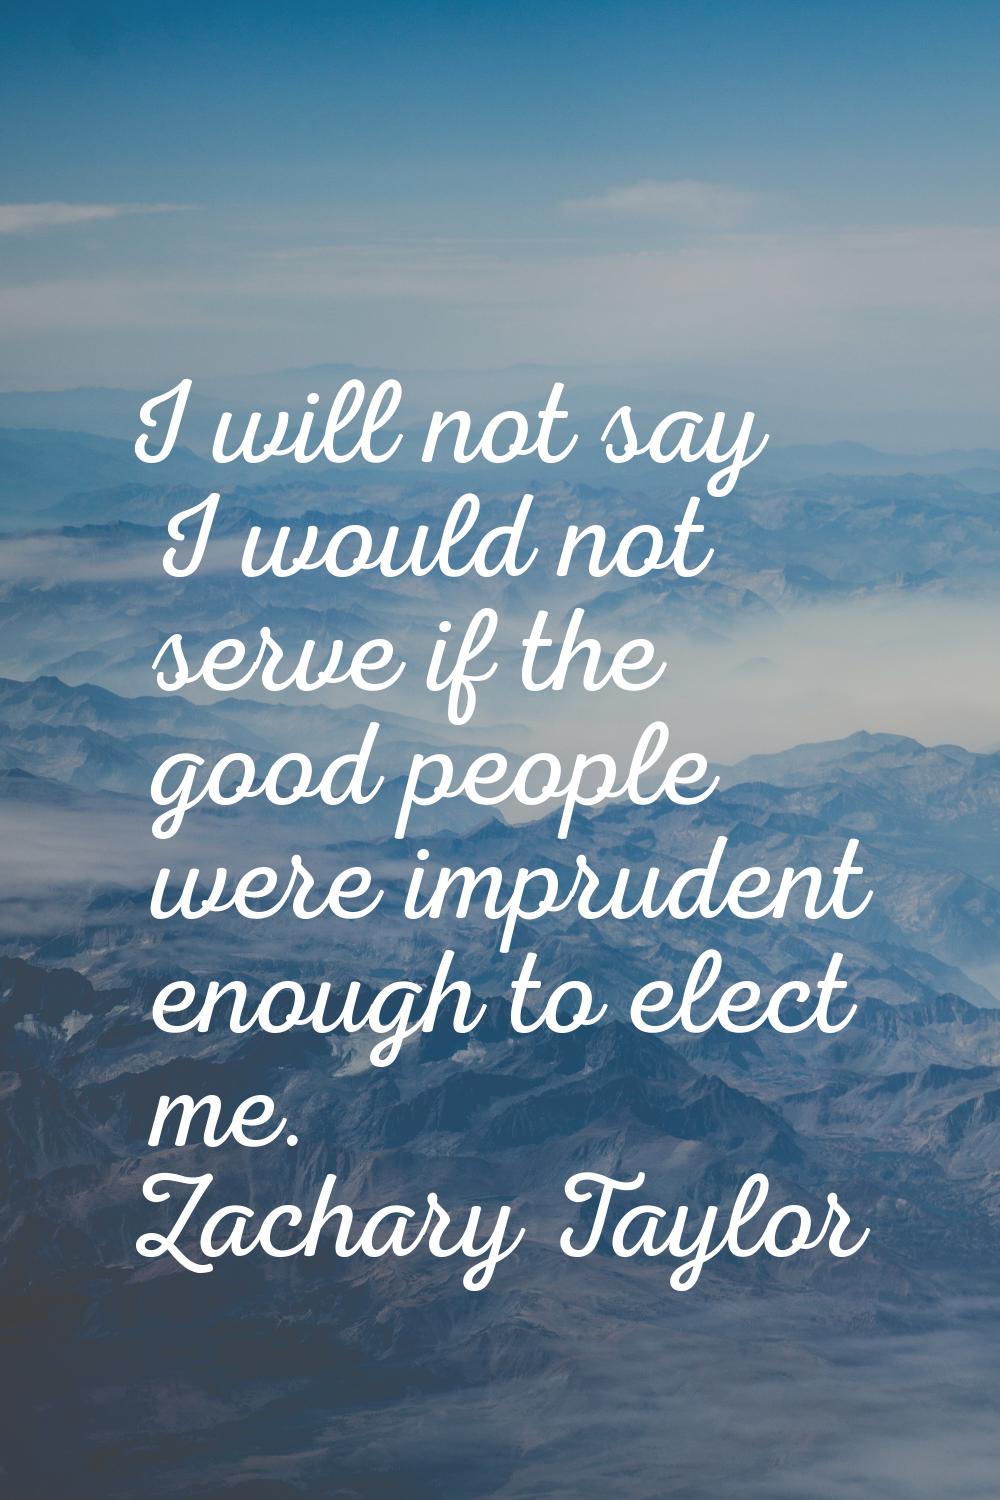 I will not say I would not serve if the good people were imprudent enough to elect me.